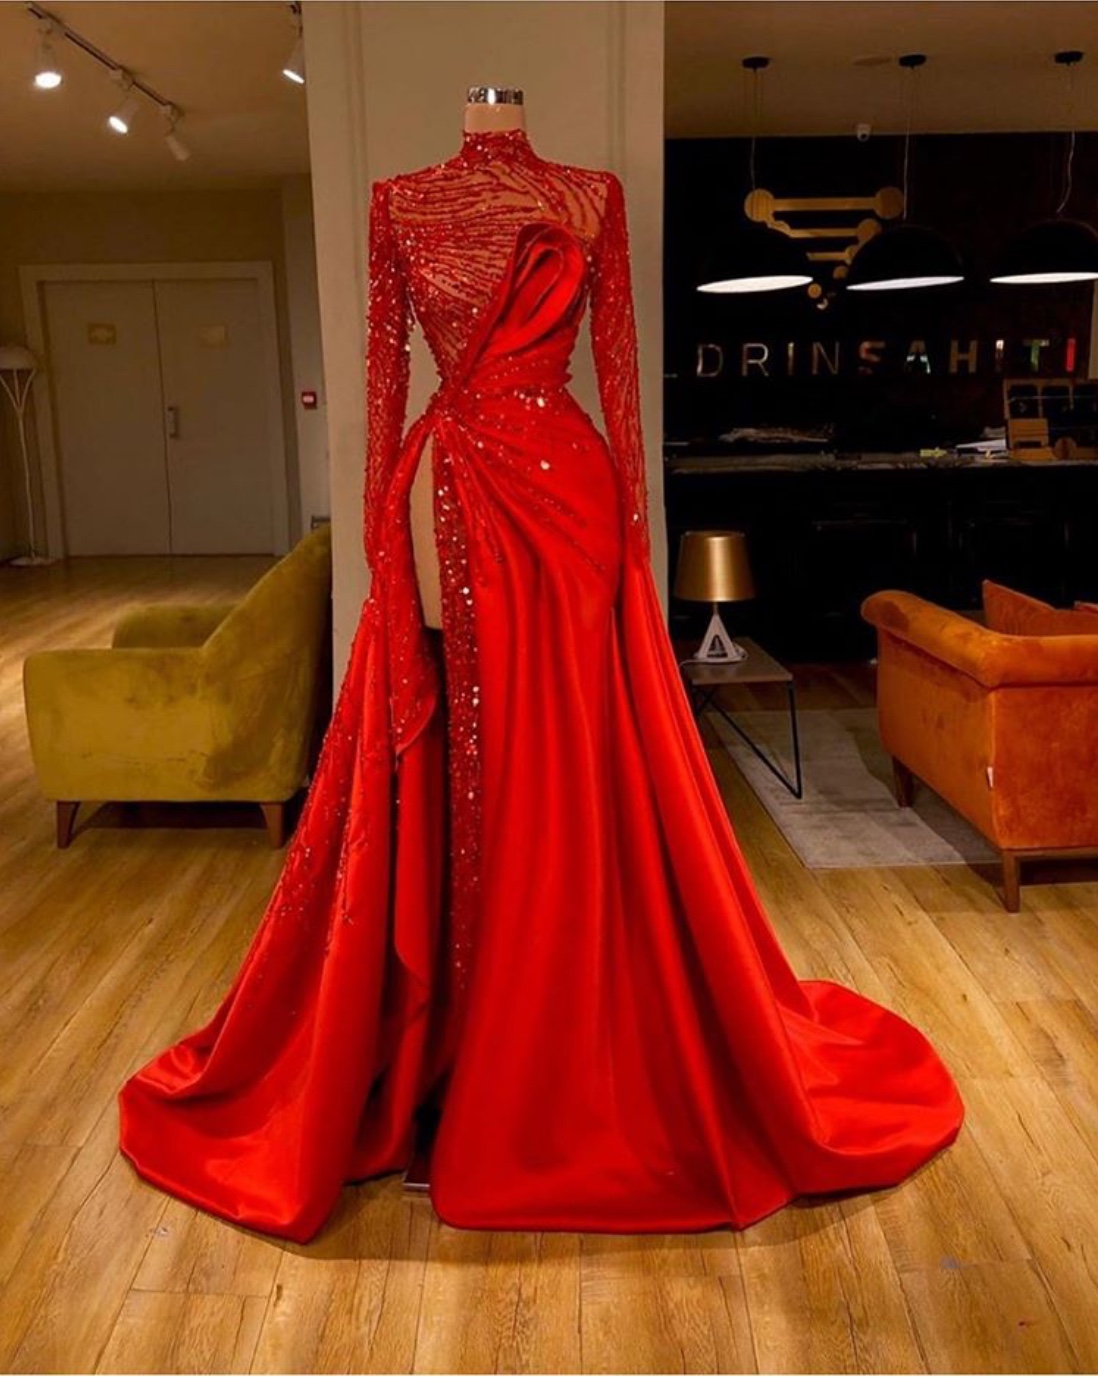 Red Gowns for Women on Their Wedding Day缩略图